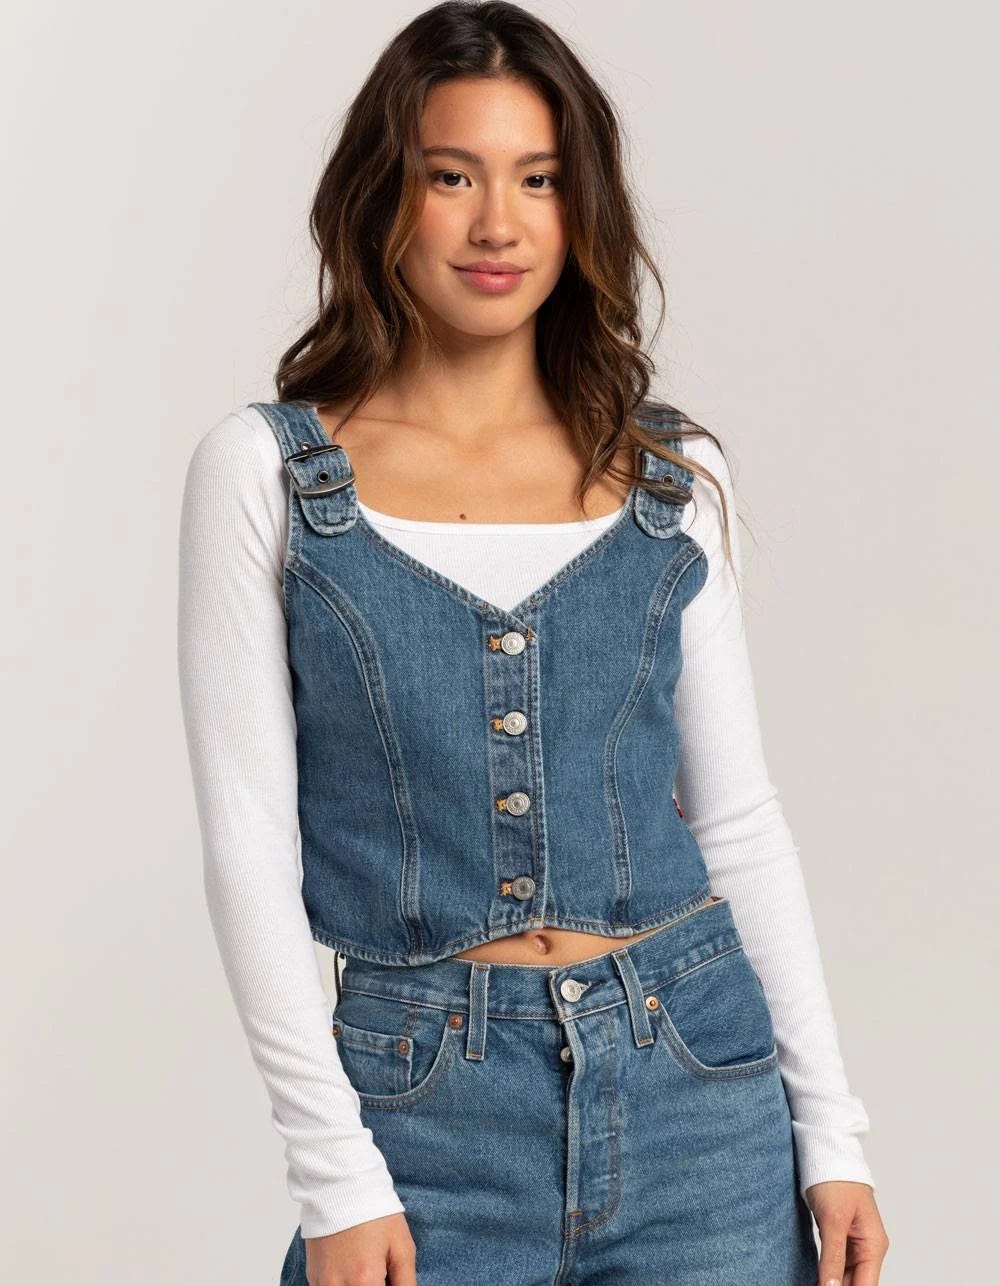 Levi's Dark Wash Charlie Denim Crop Top: Perfect Match for High-Rise Skinny Jeans | Image